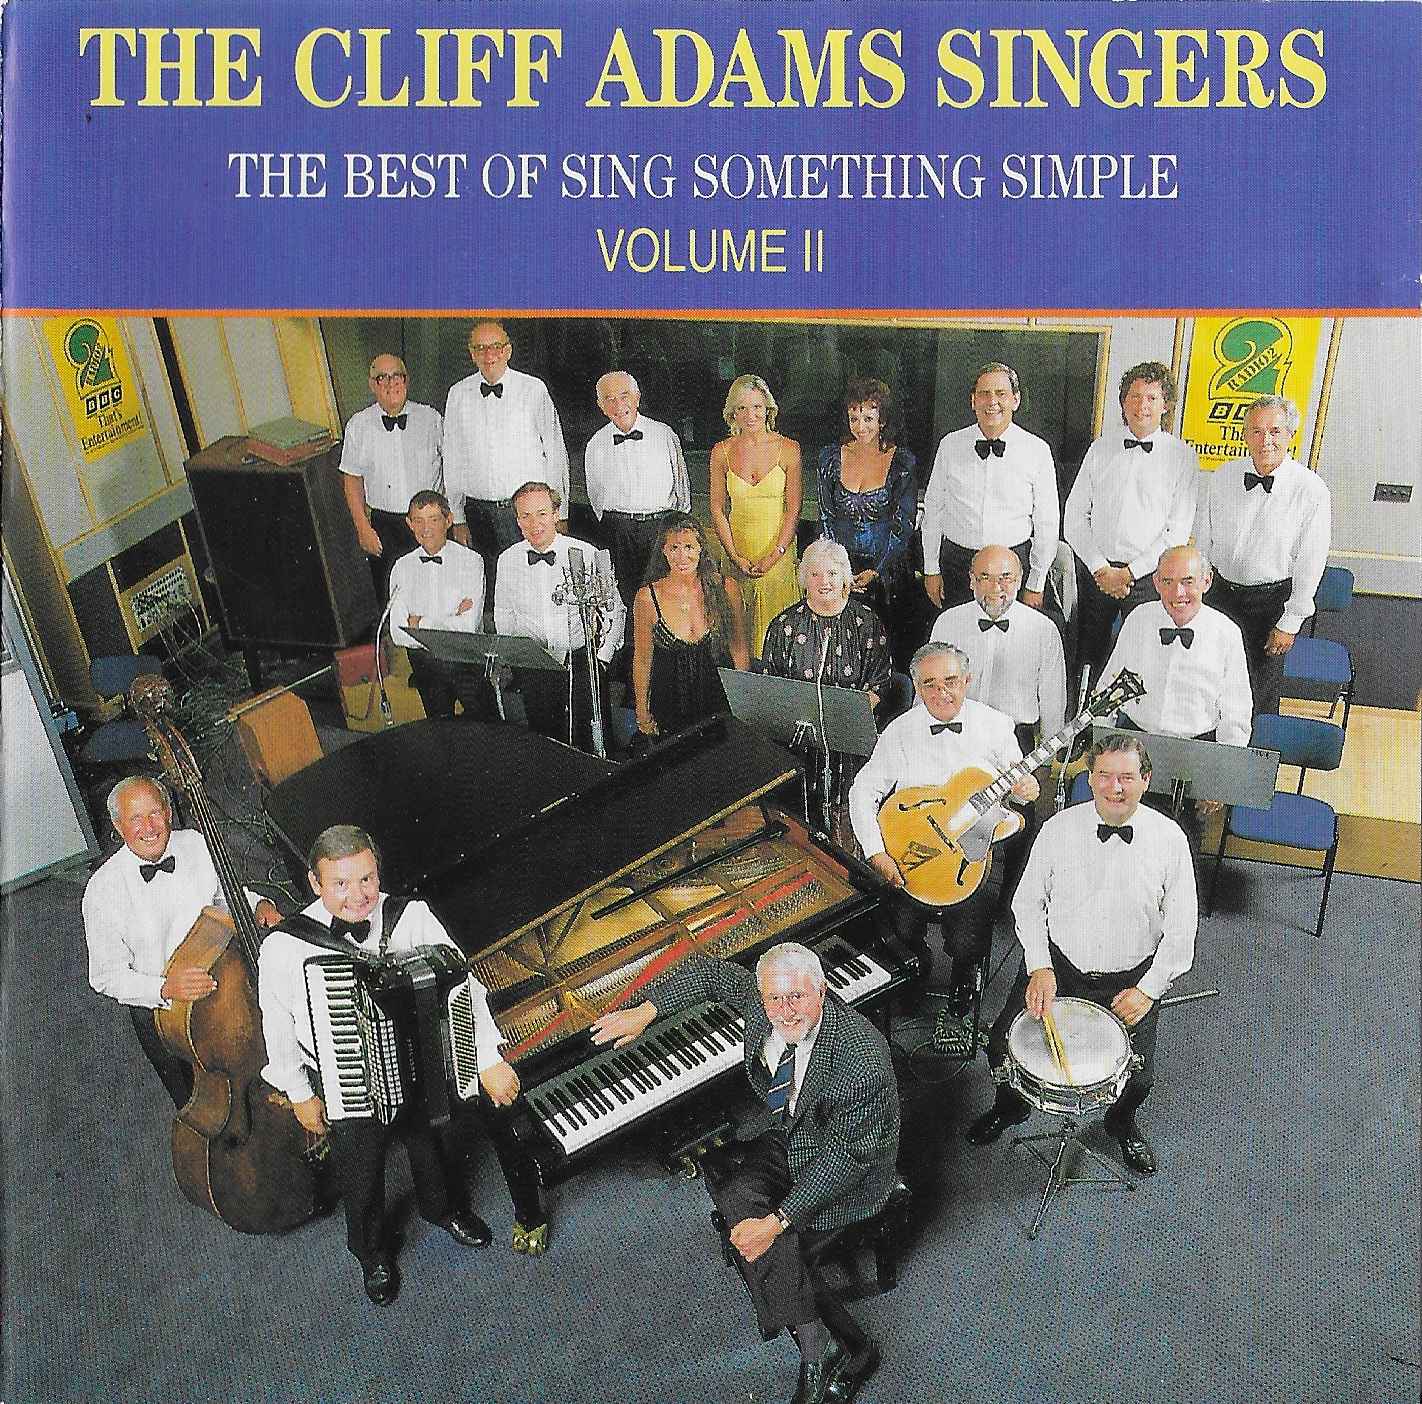 Picture of Cliff Adams - Volume 2 by artist Various / Cliff Adams from the BBC cds - Records and Tapes library